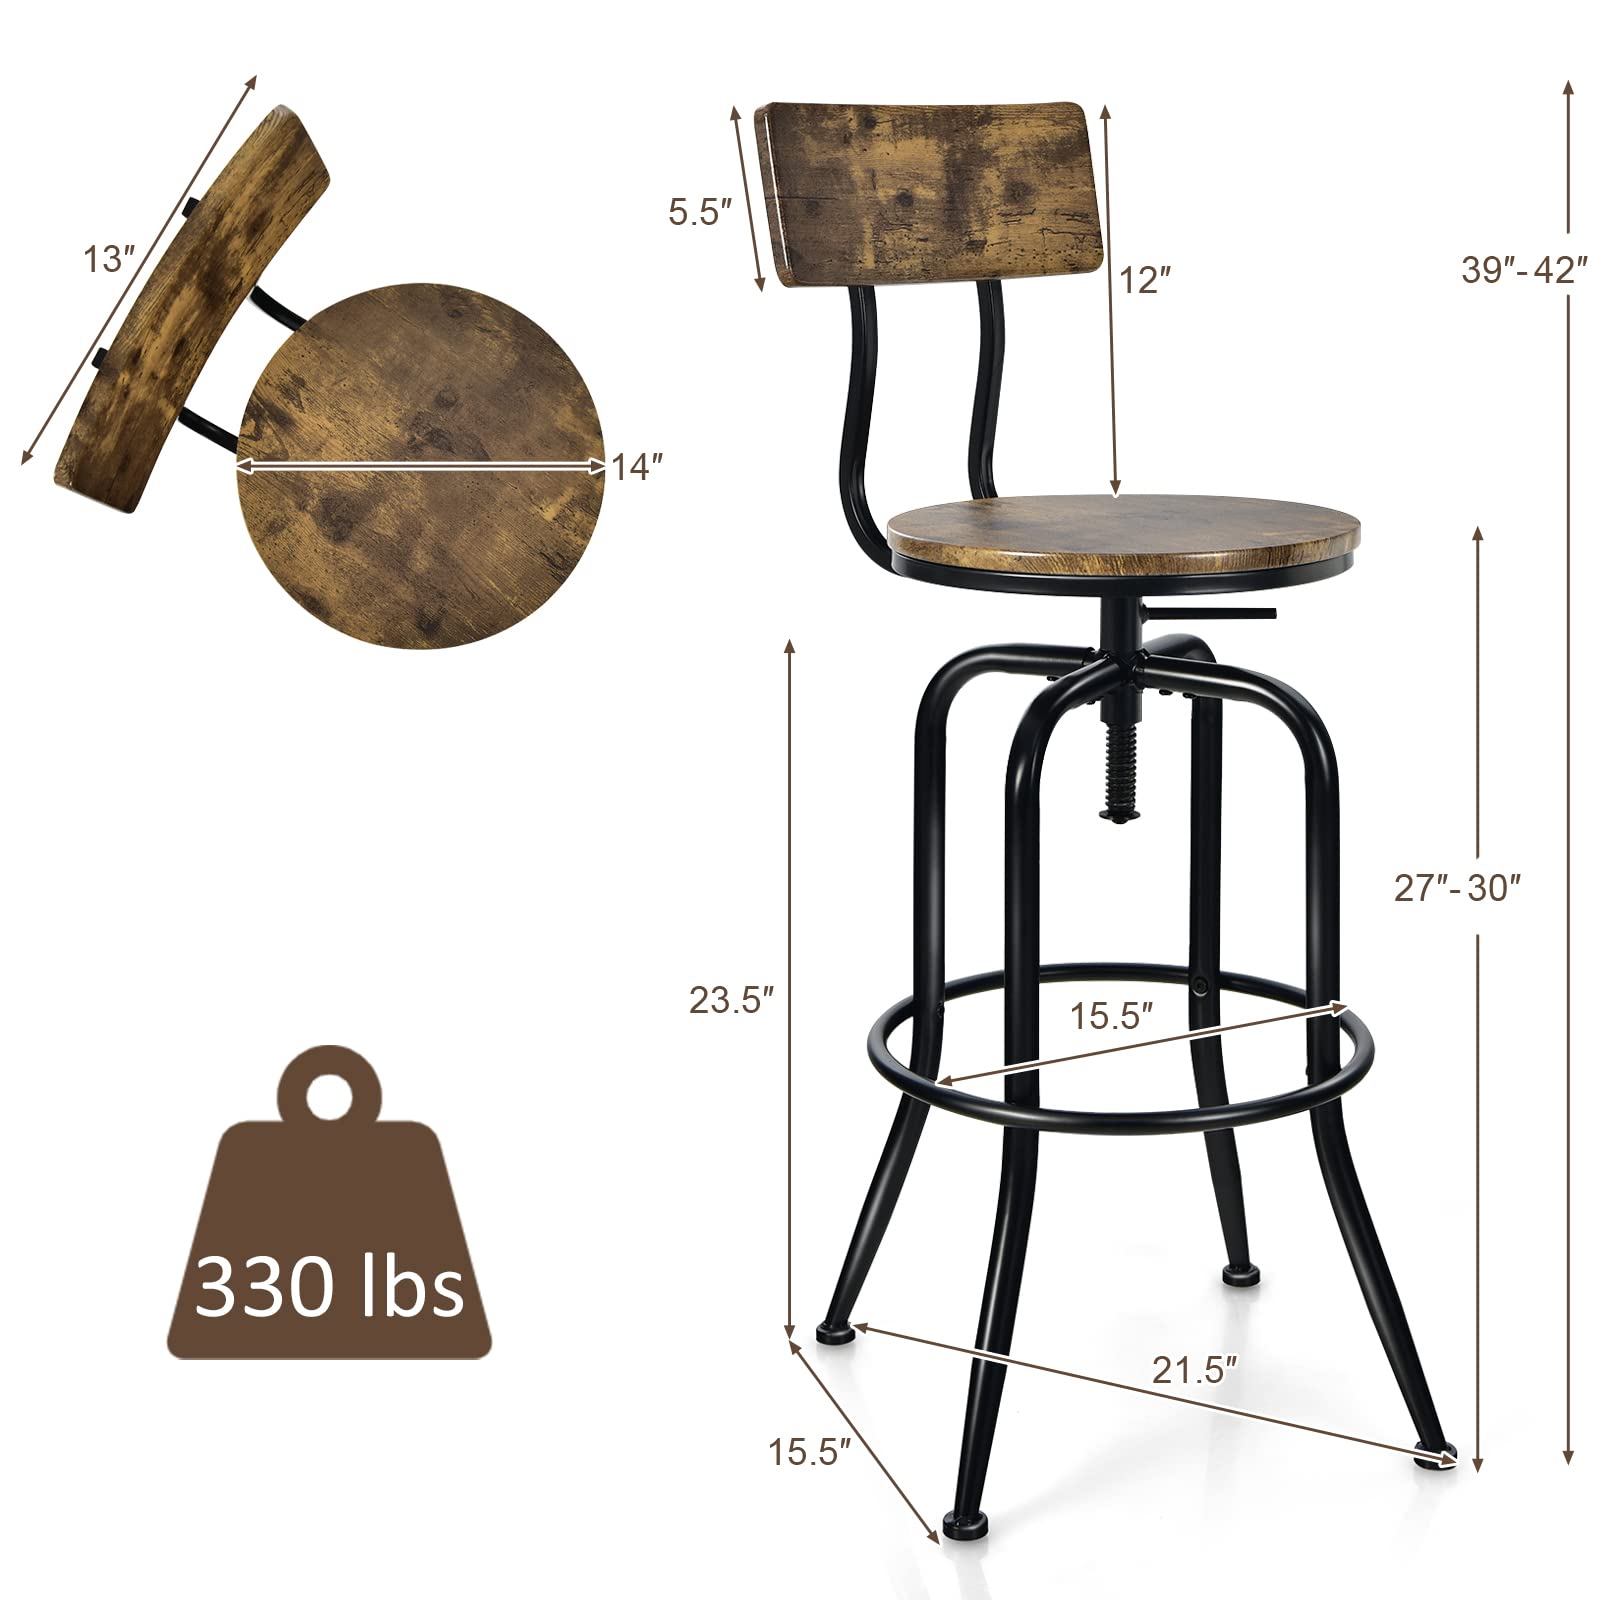 Industrial Bar Stool, Vintage Adjustable Swivel Counter Height Kitchen Dining Chair with Arc-Shaped Backrest